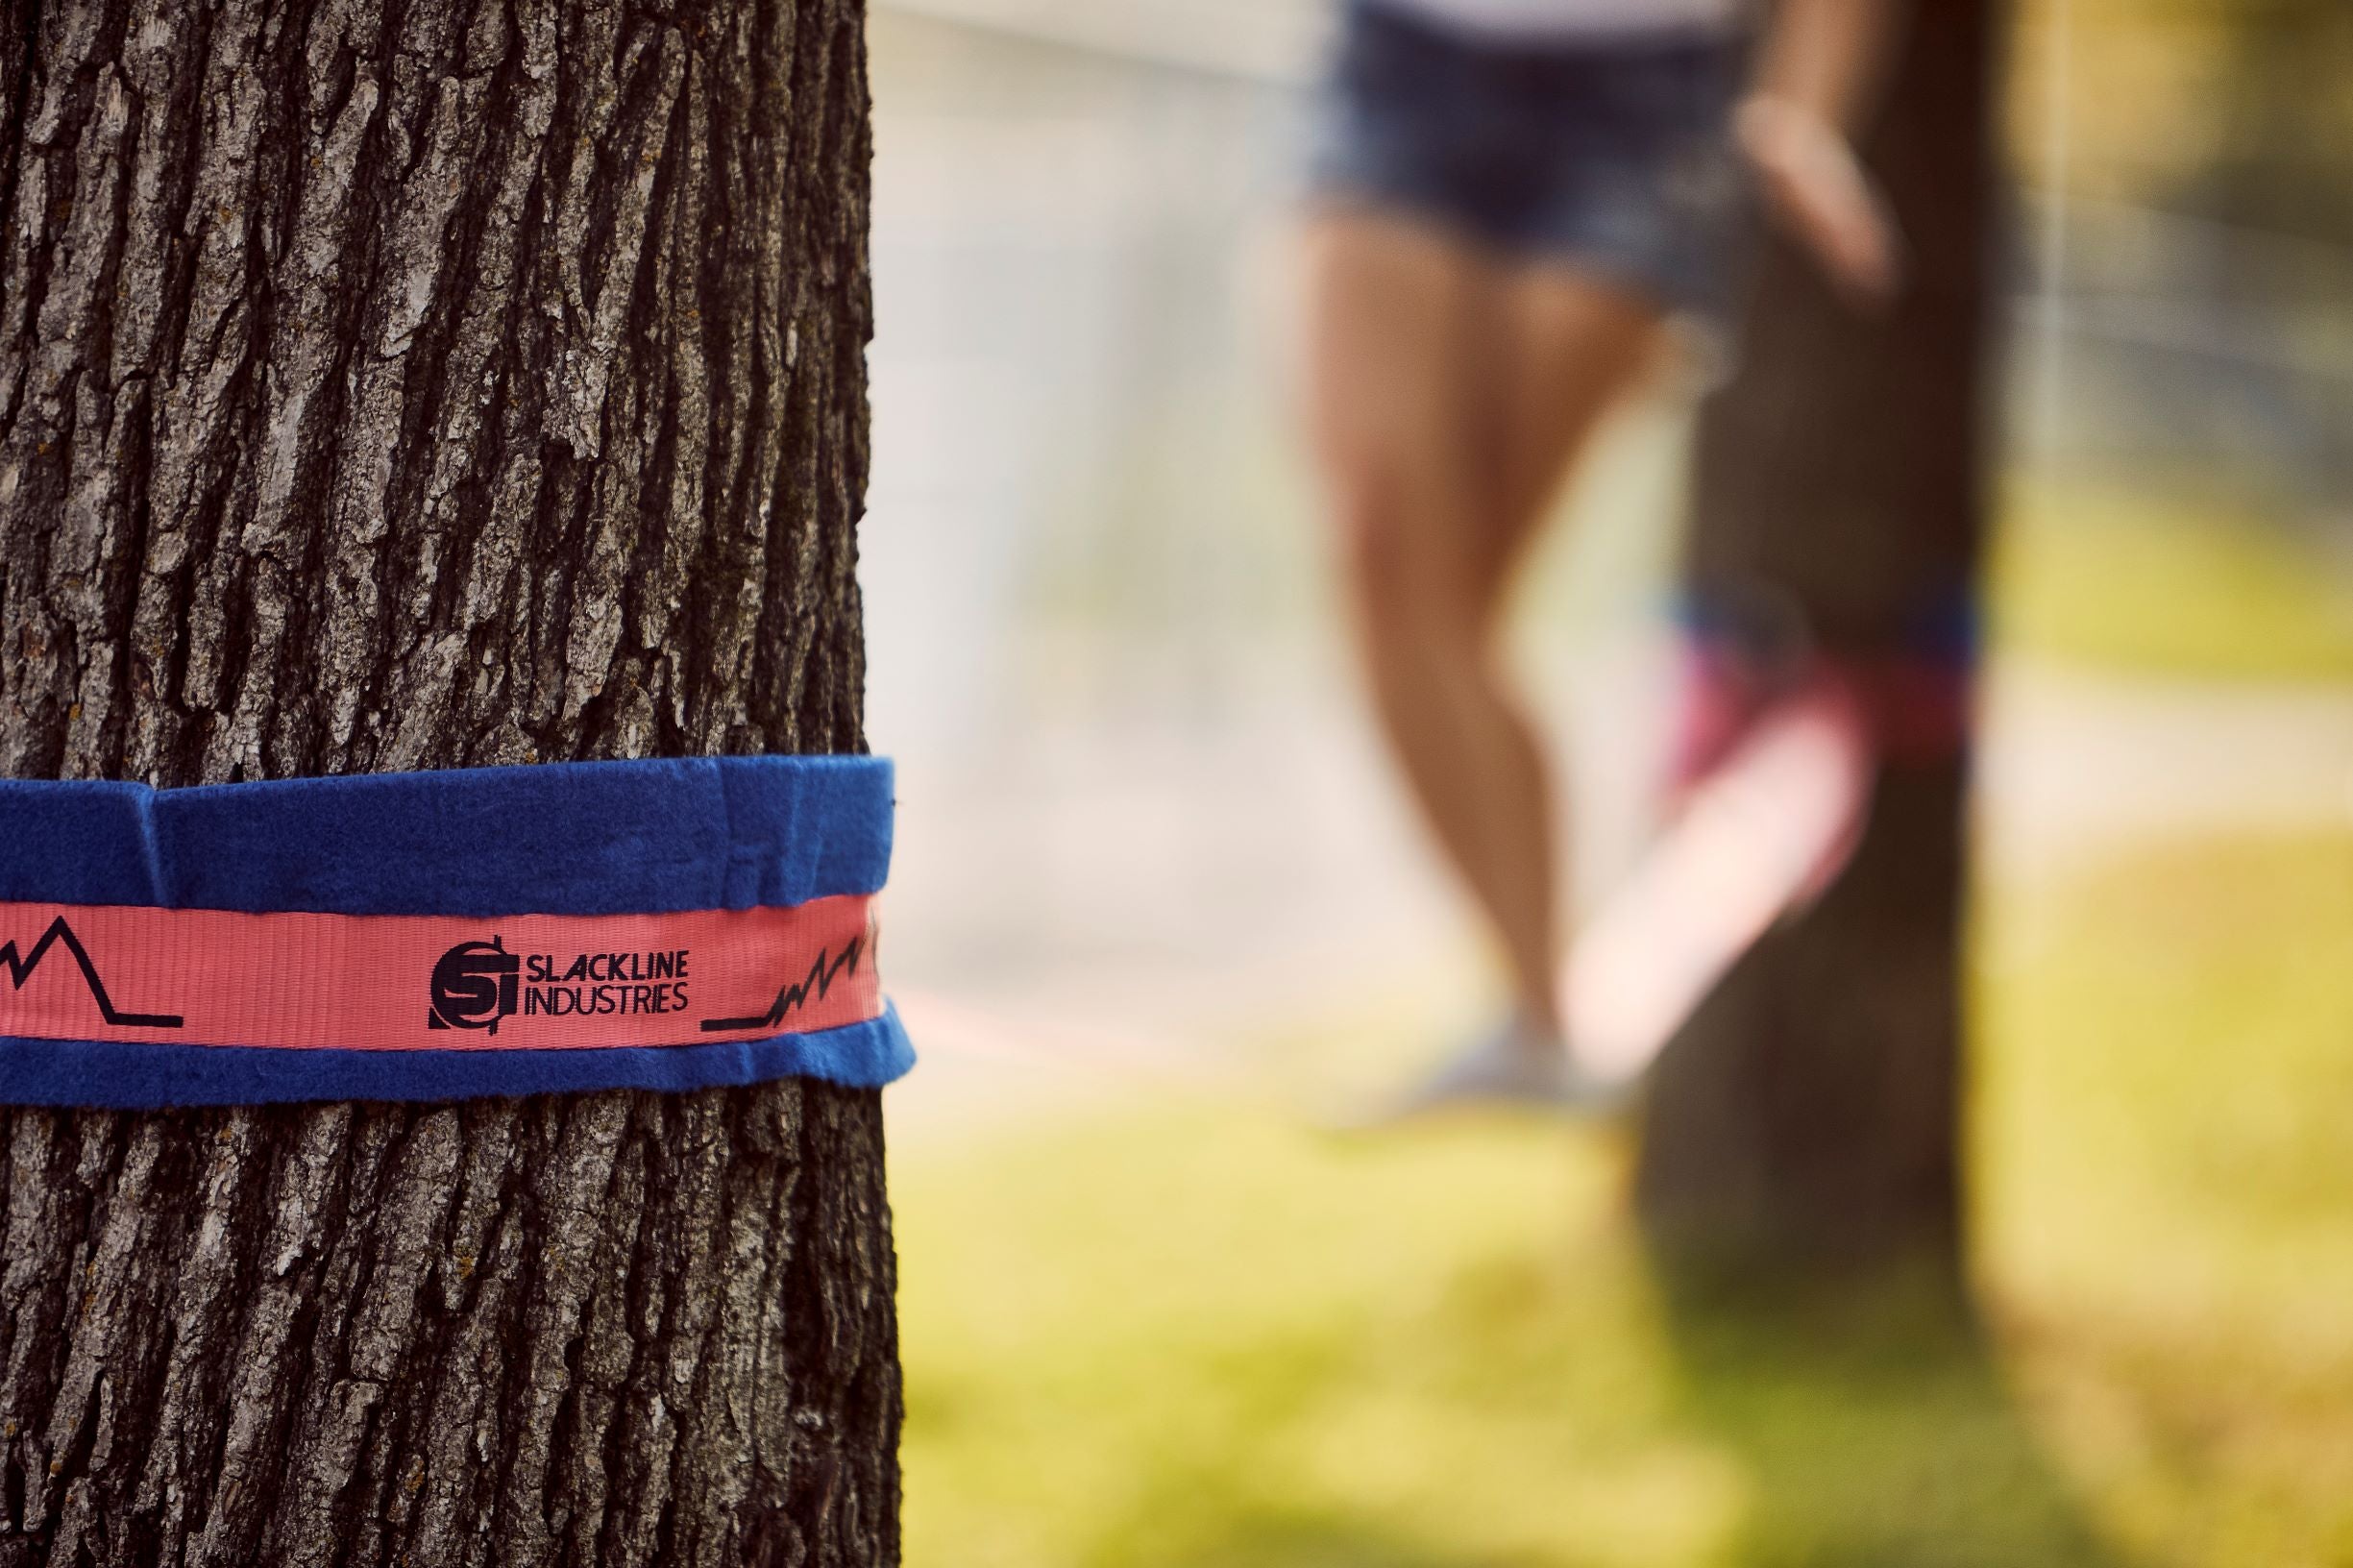 How to take care of your slackline gear